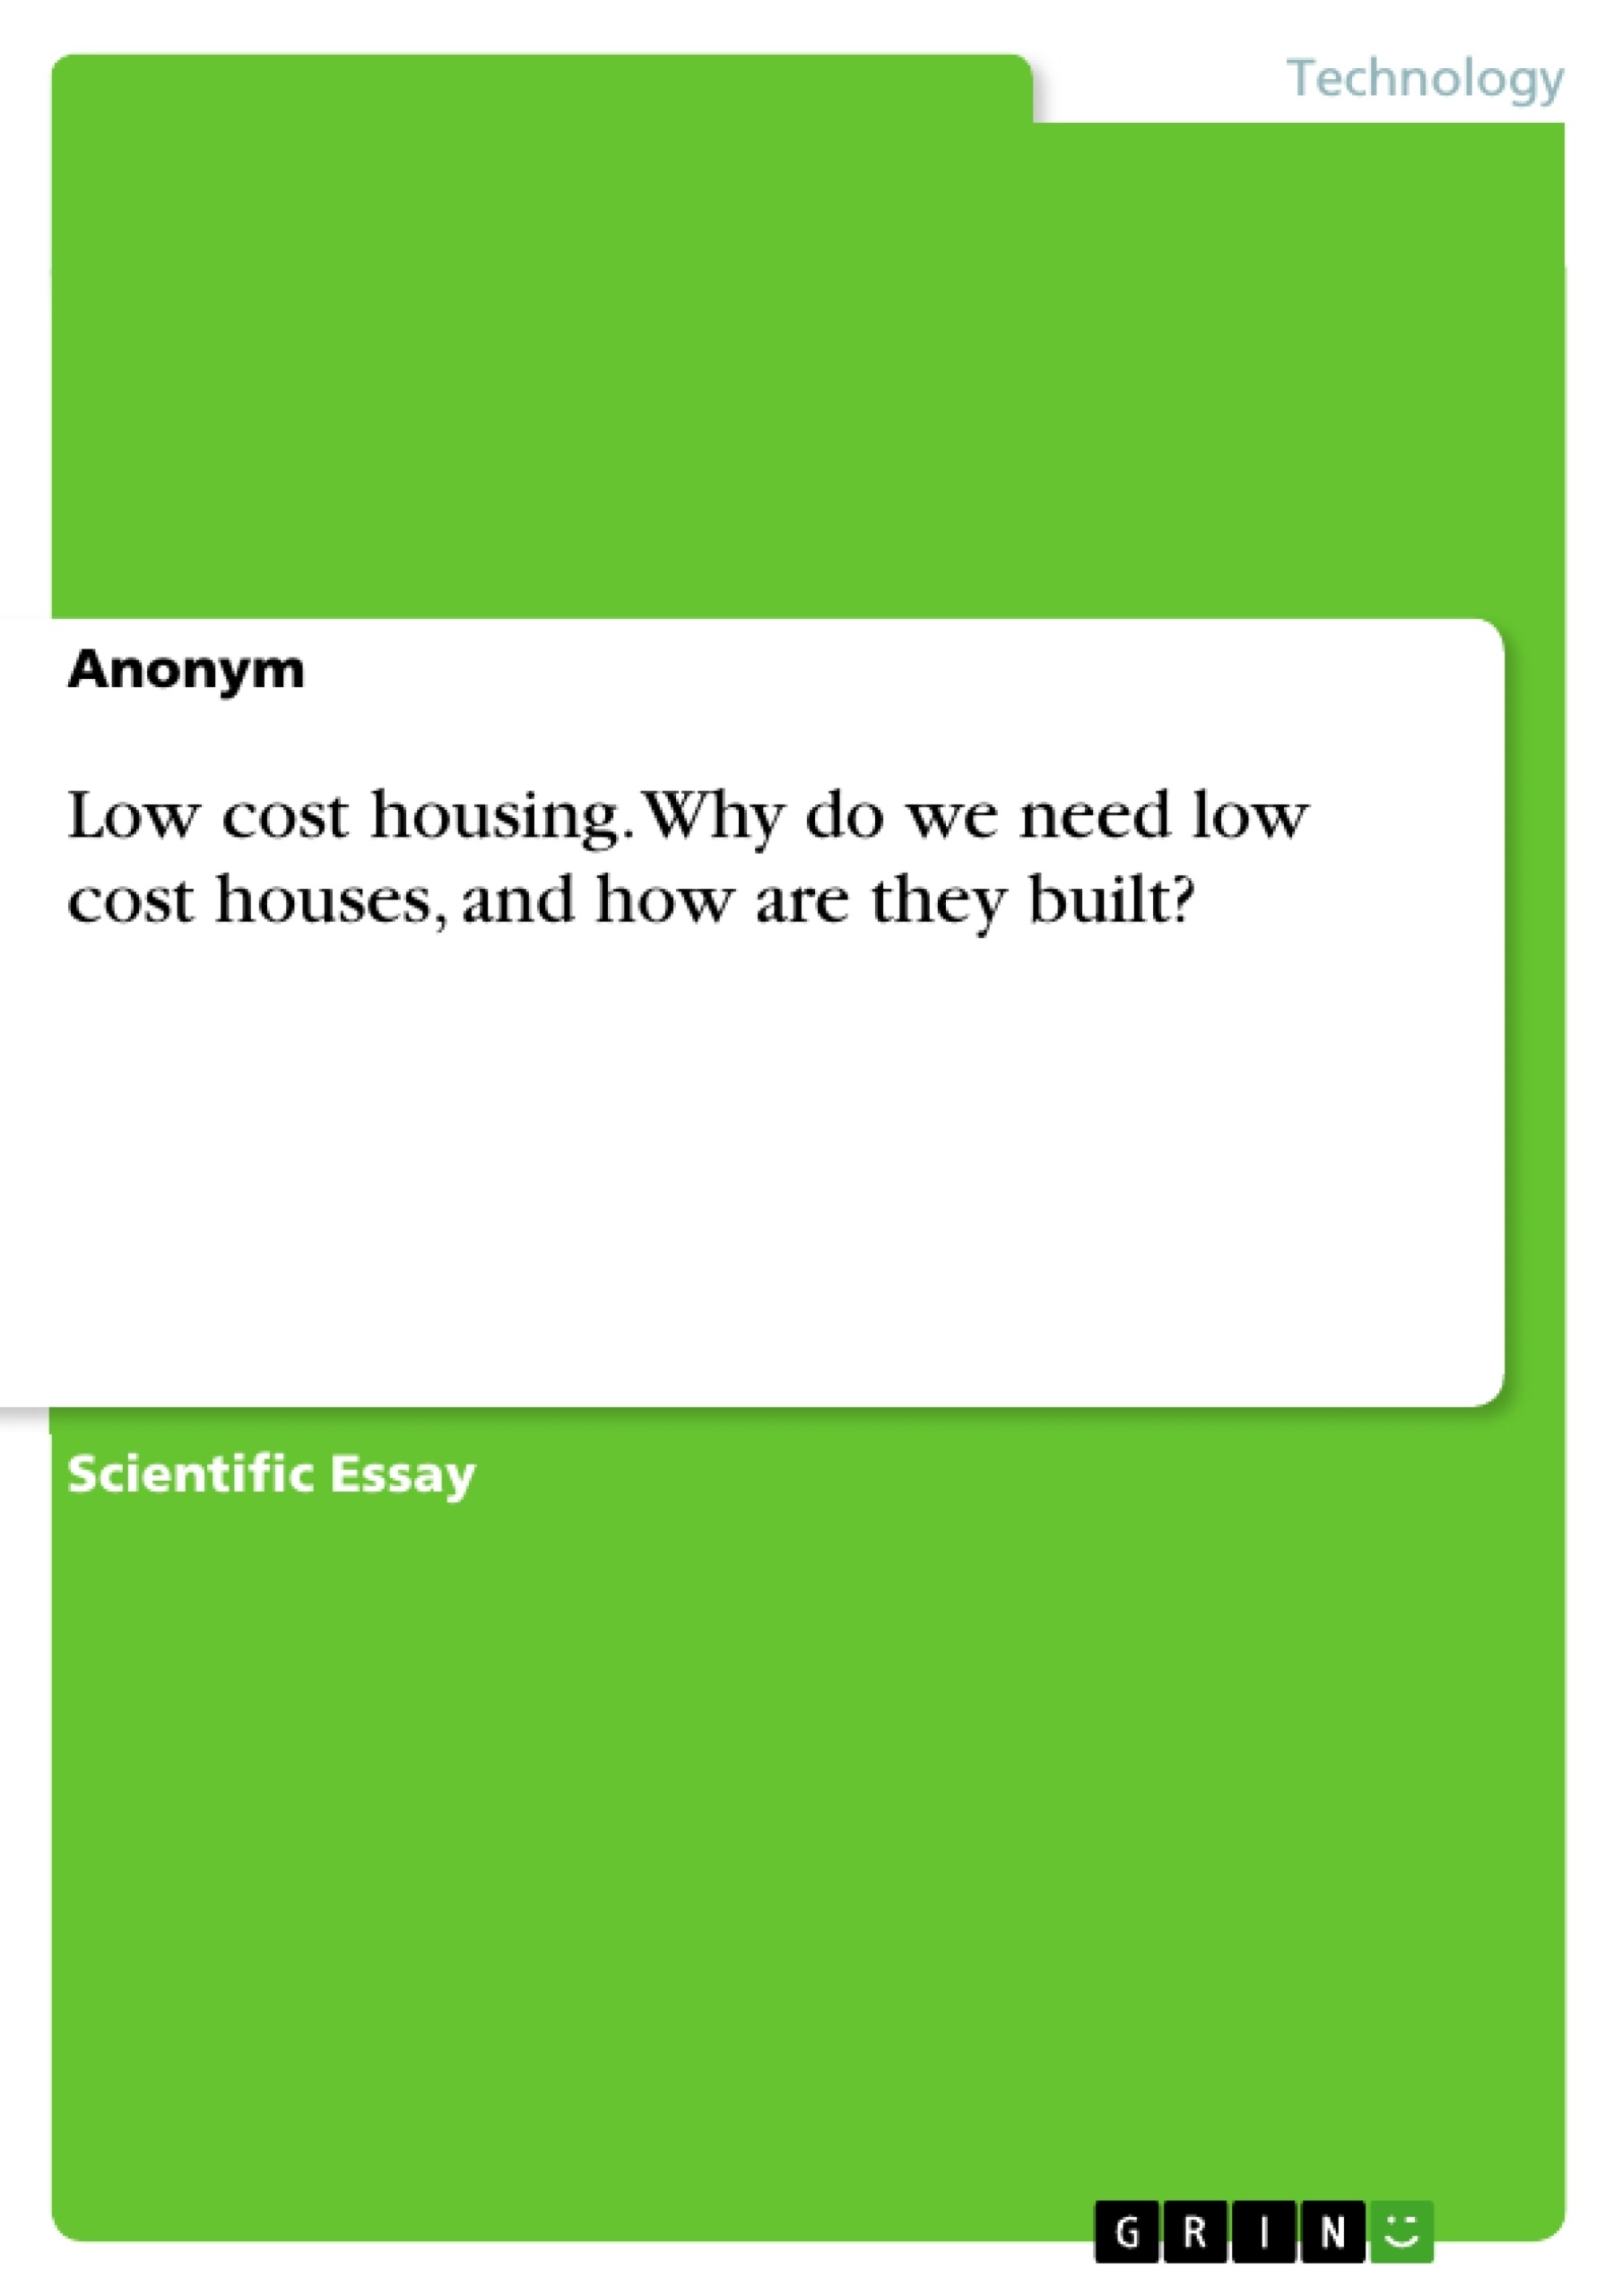 Title: Low cost housing. Why do we need low cost houses, and how are they built?